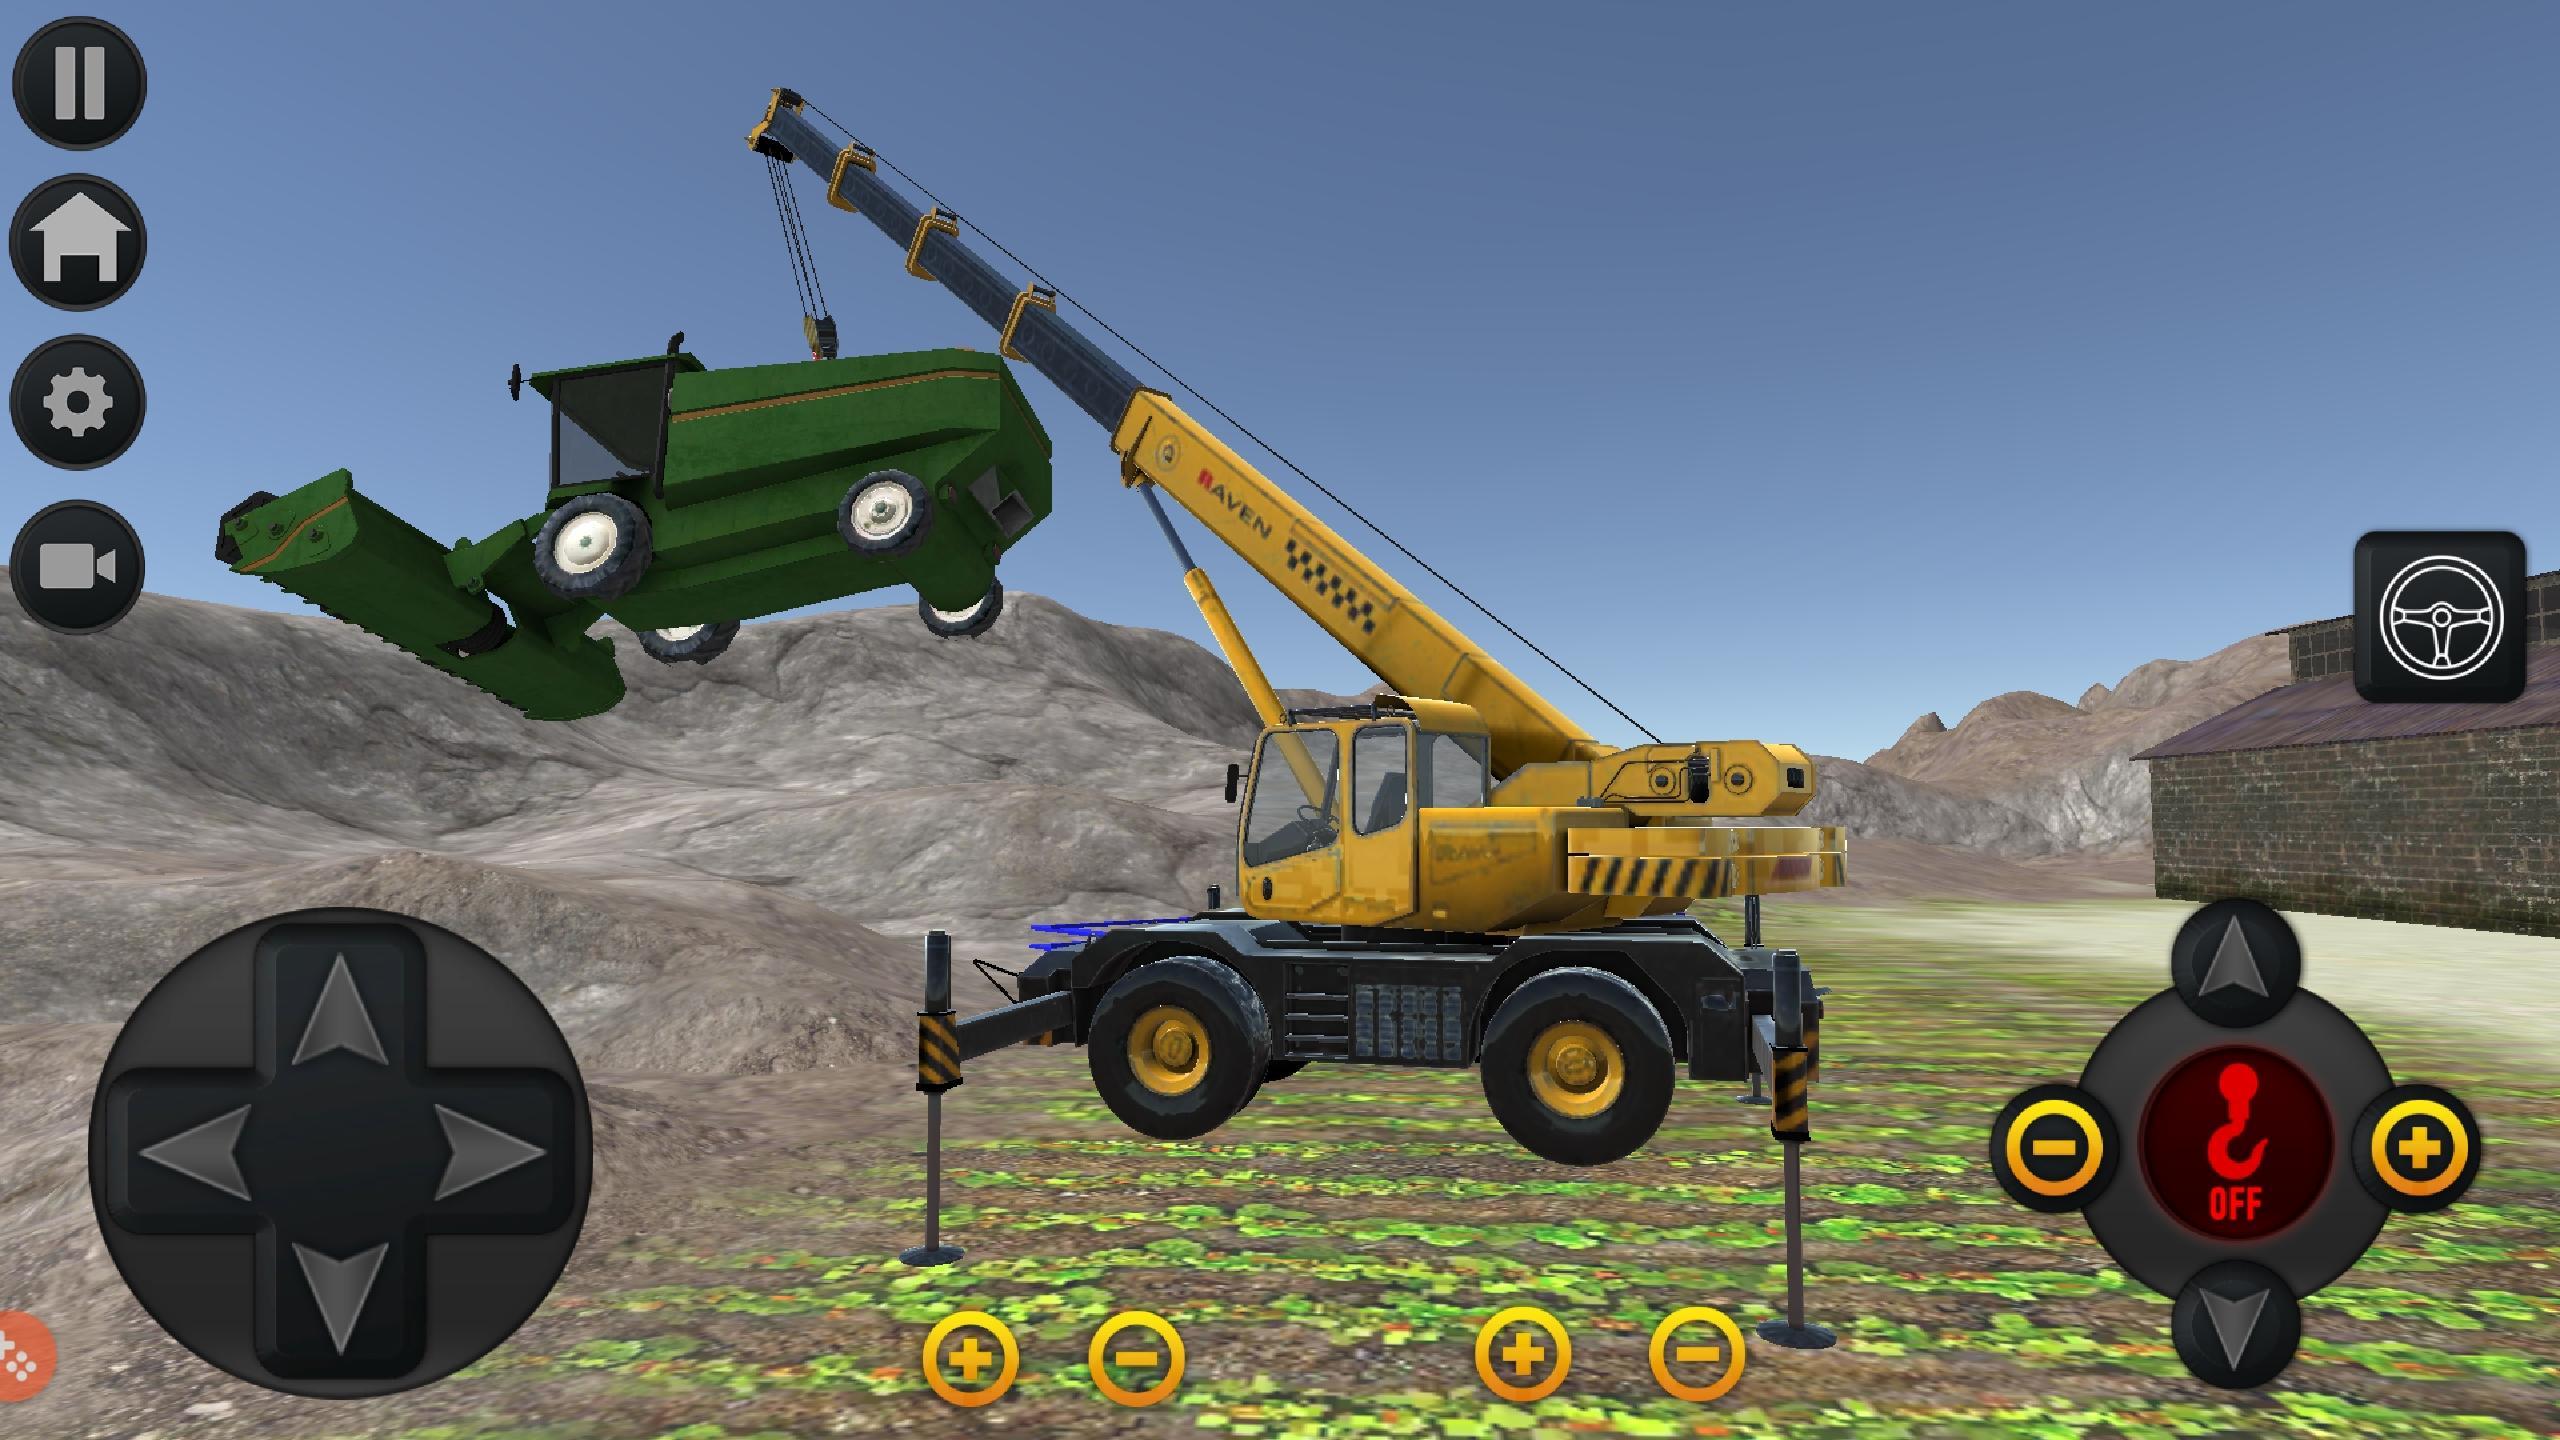 fs19 file download for android